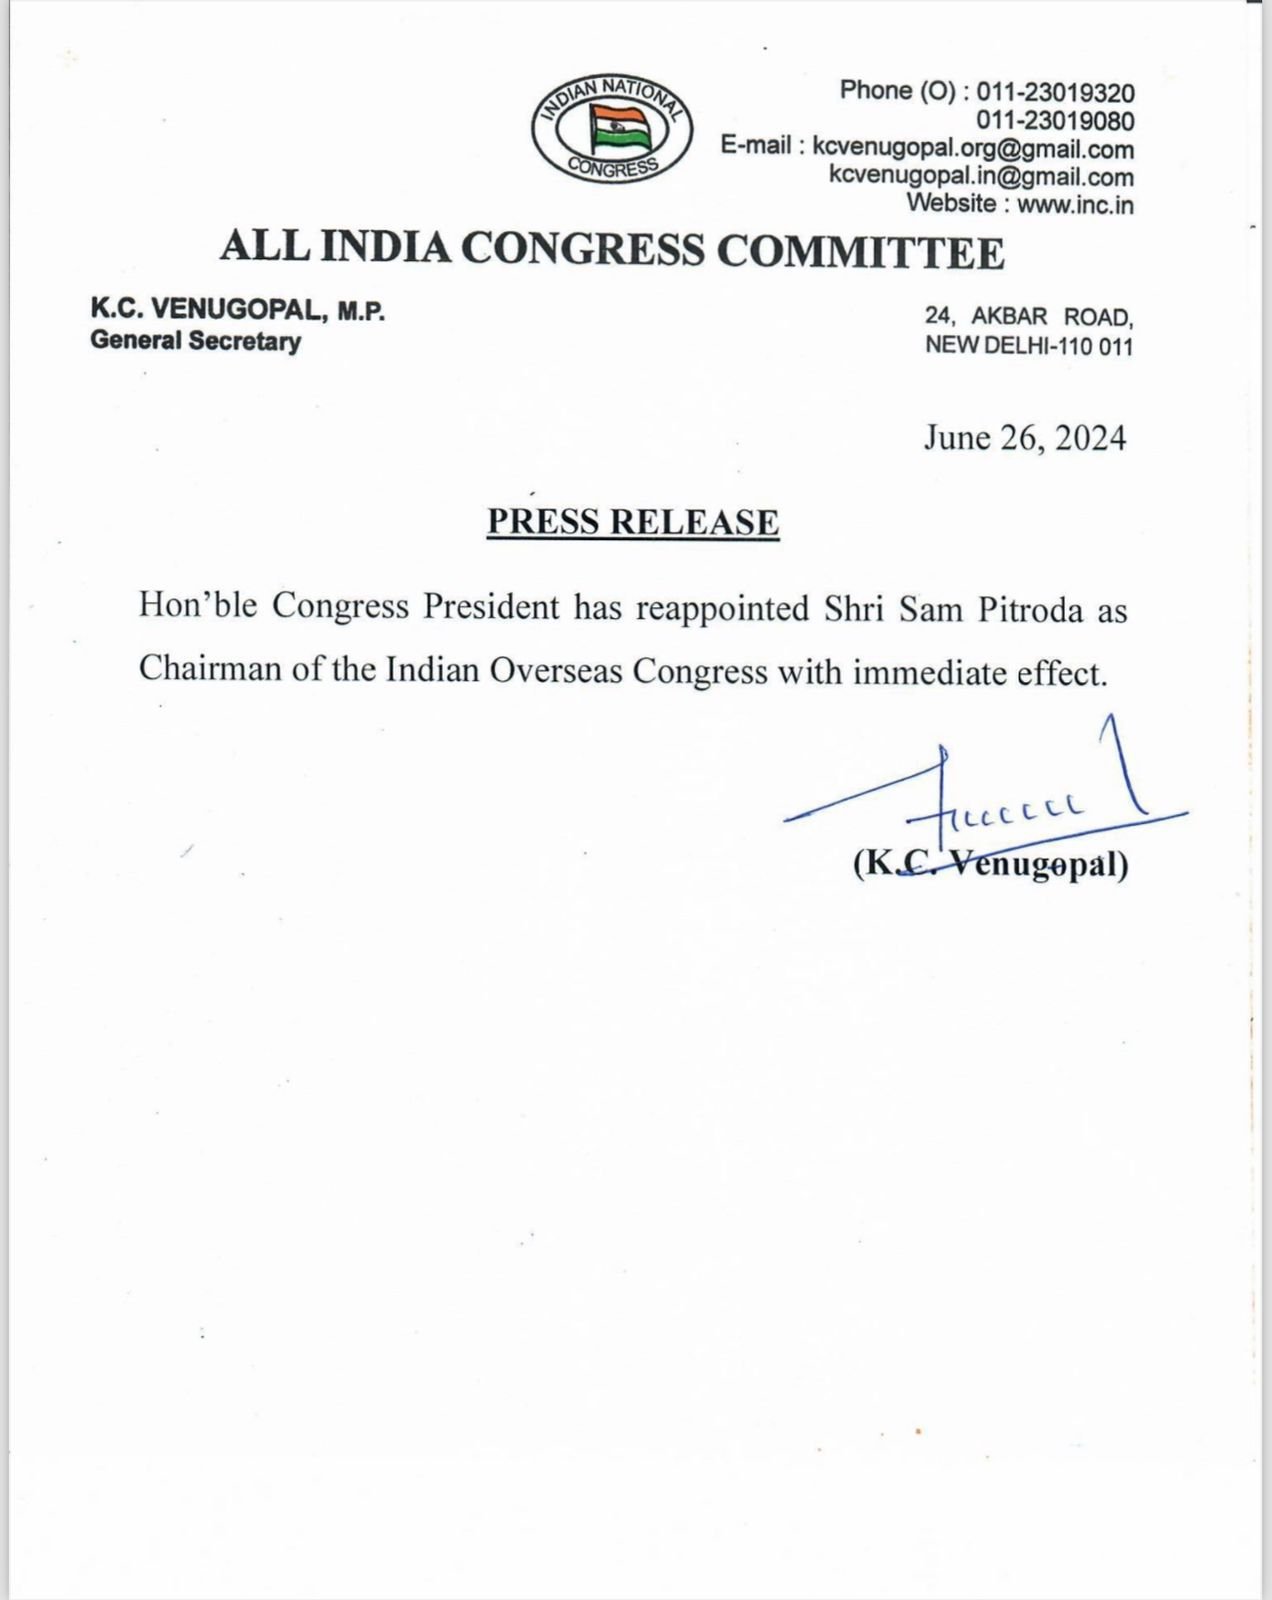 Sam Pitroda re-appointed as chairman of the Indian Overseas Congress with immediate effect